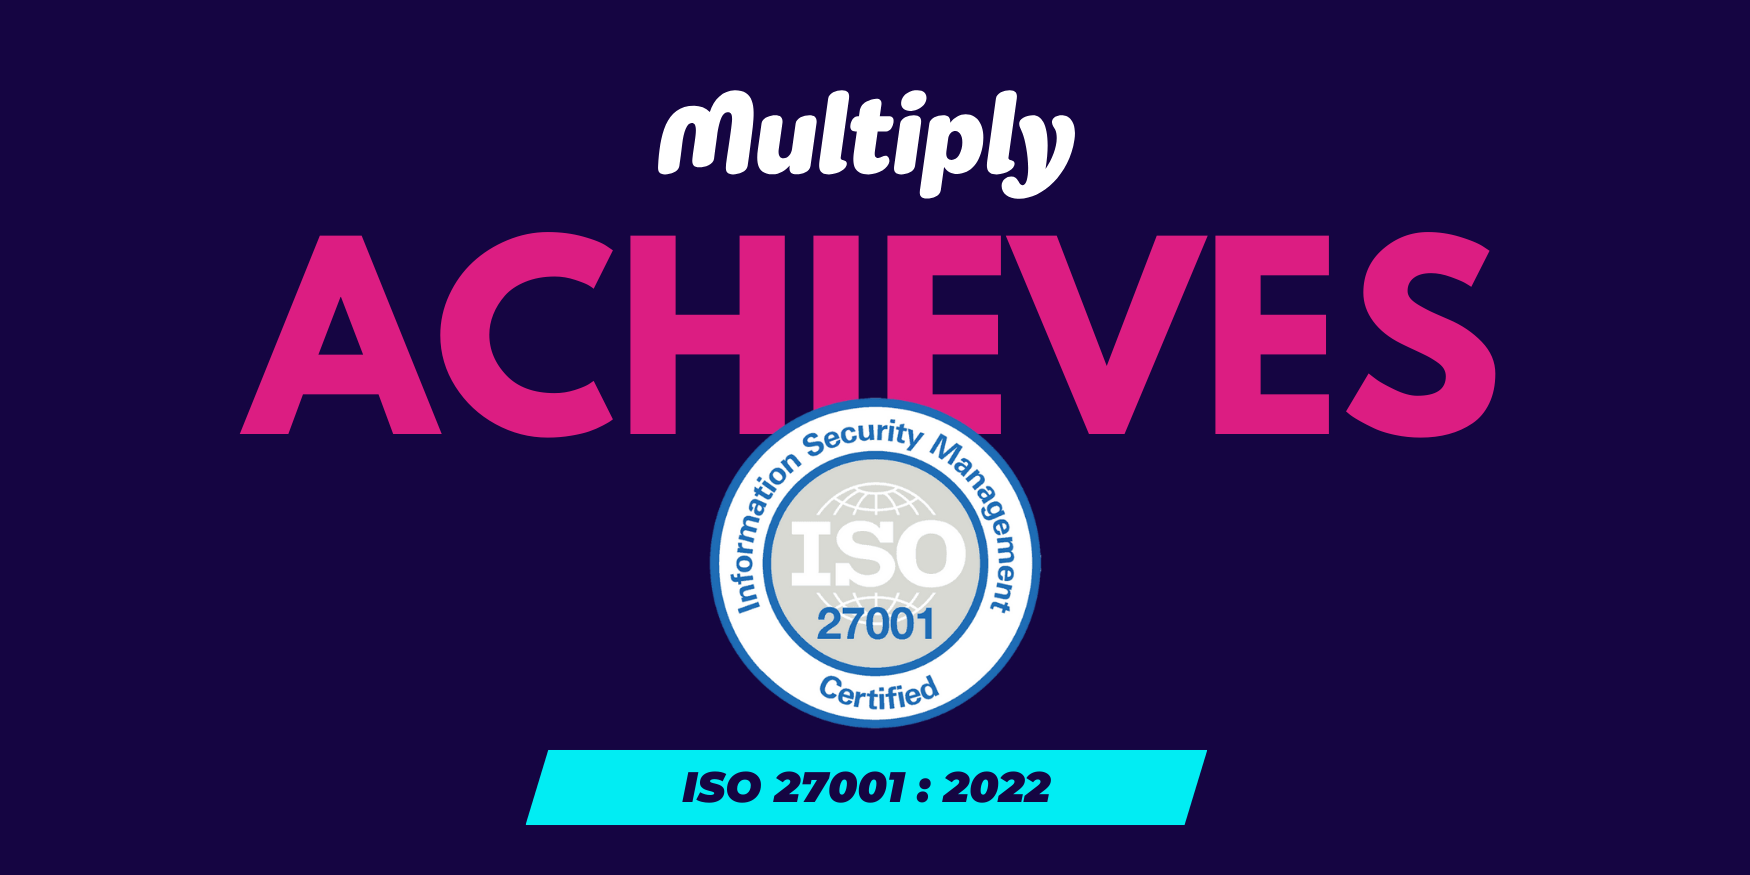 Text reads: Multiply achieves ISO 27001:2002 with the Multiply logo and the ISO 27001 logo